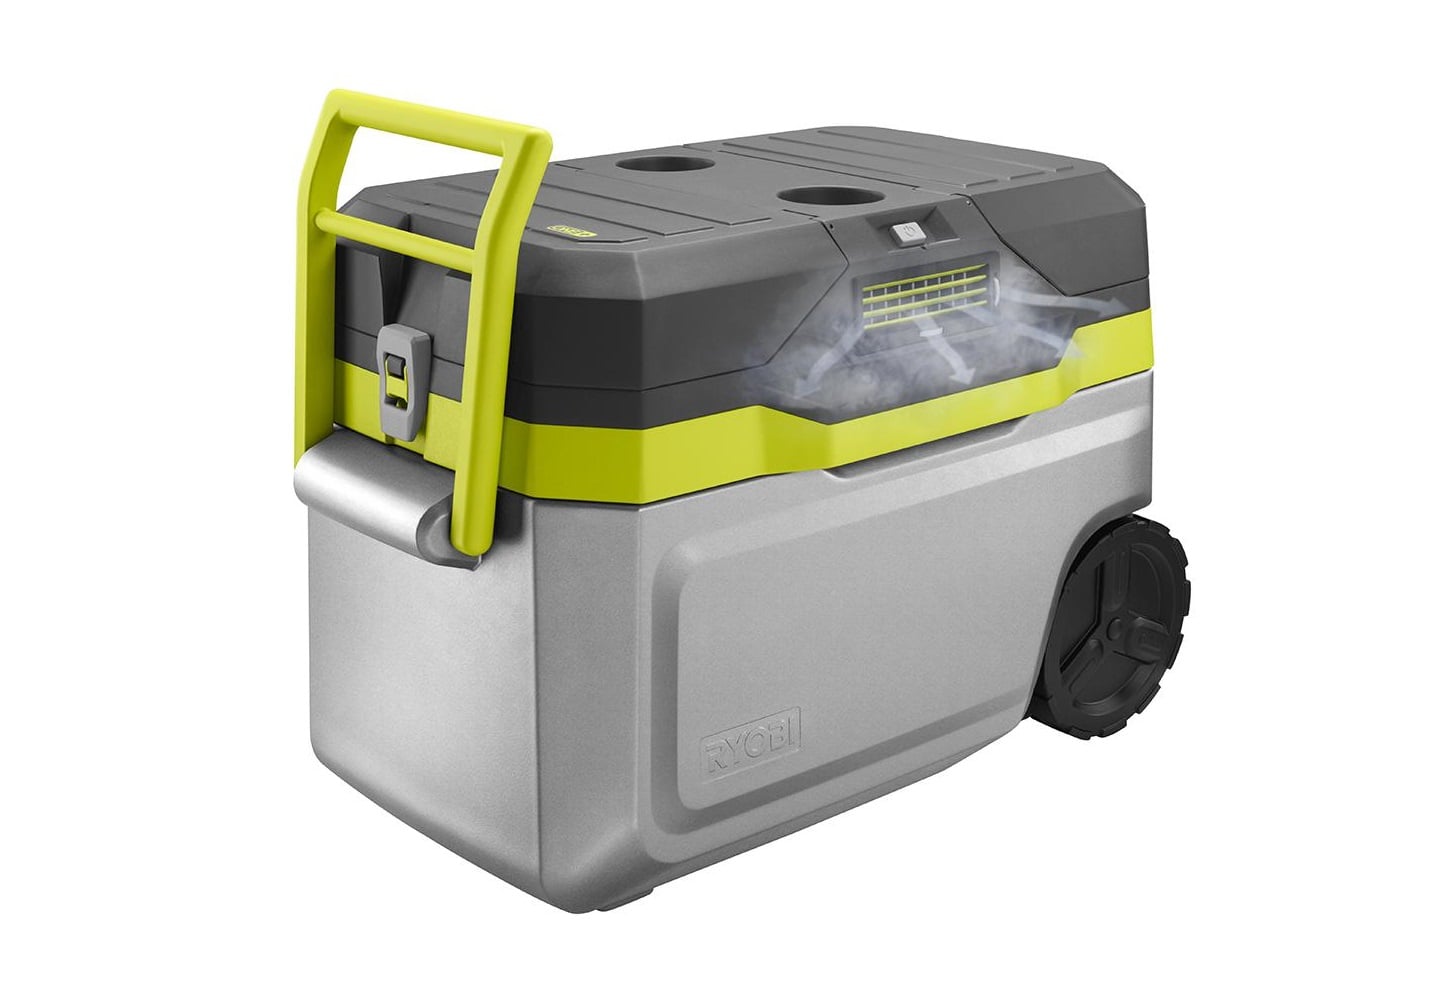 Ryobi Launches 18V One+ Cooling Cooler